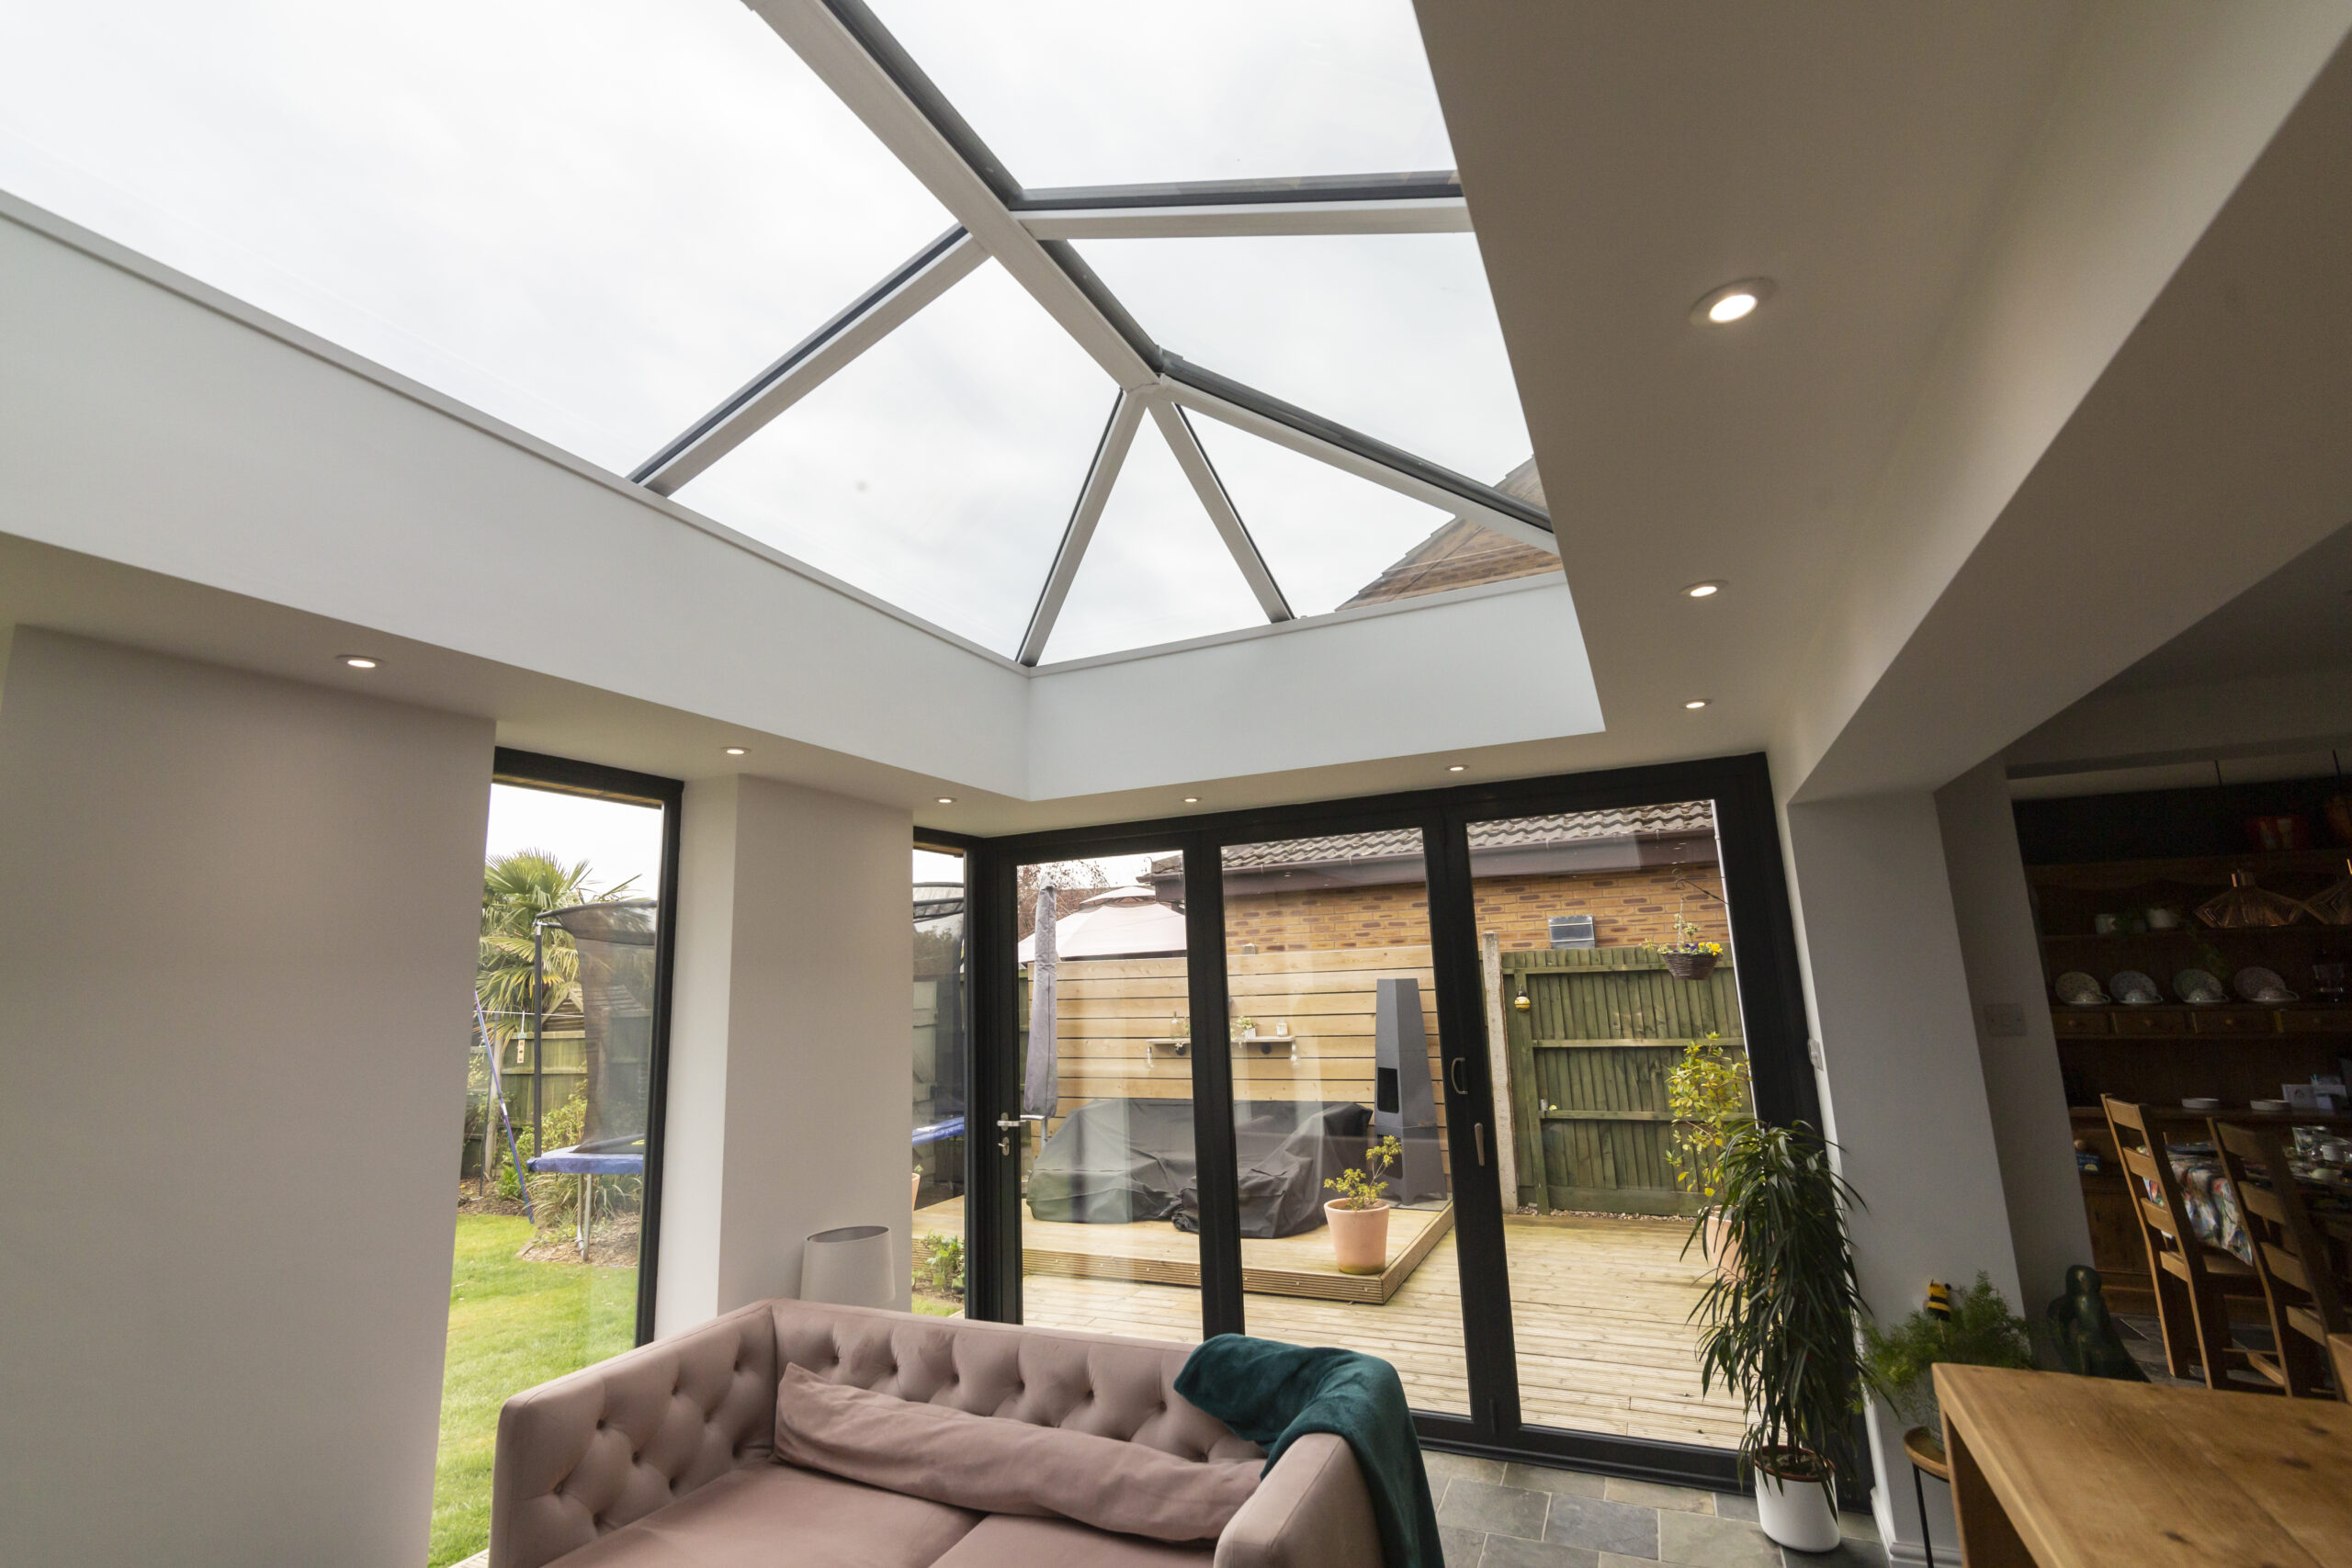 Where is the best place to put a roof lantern?